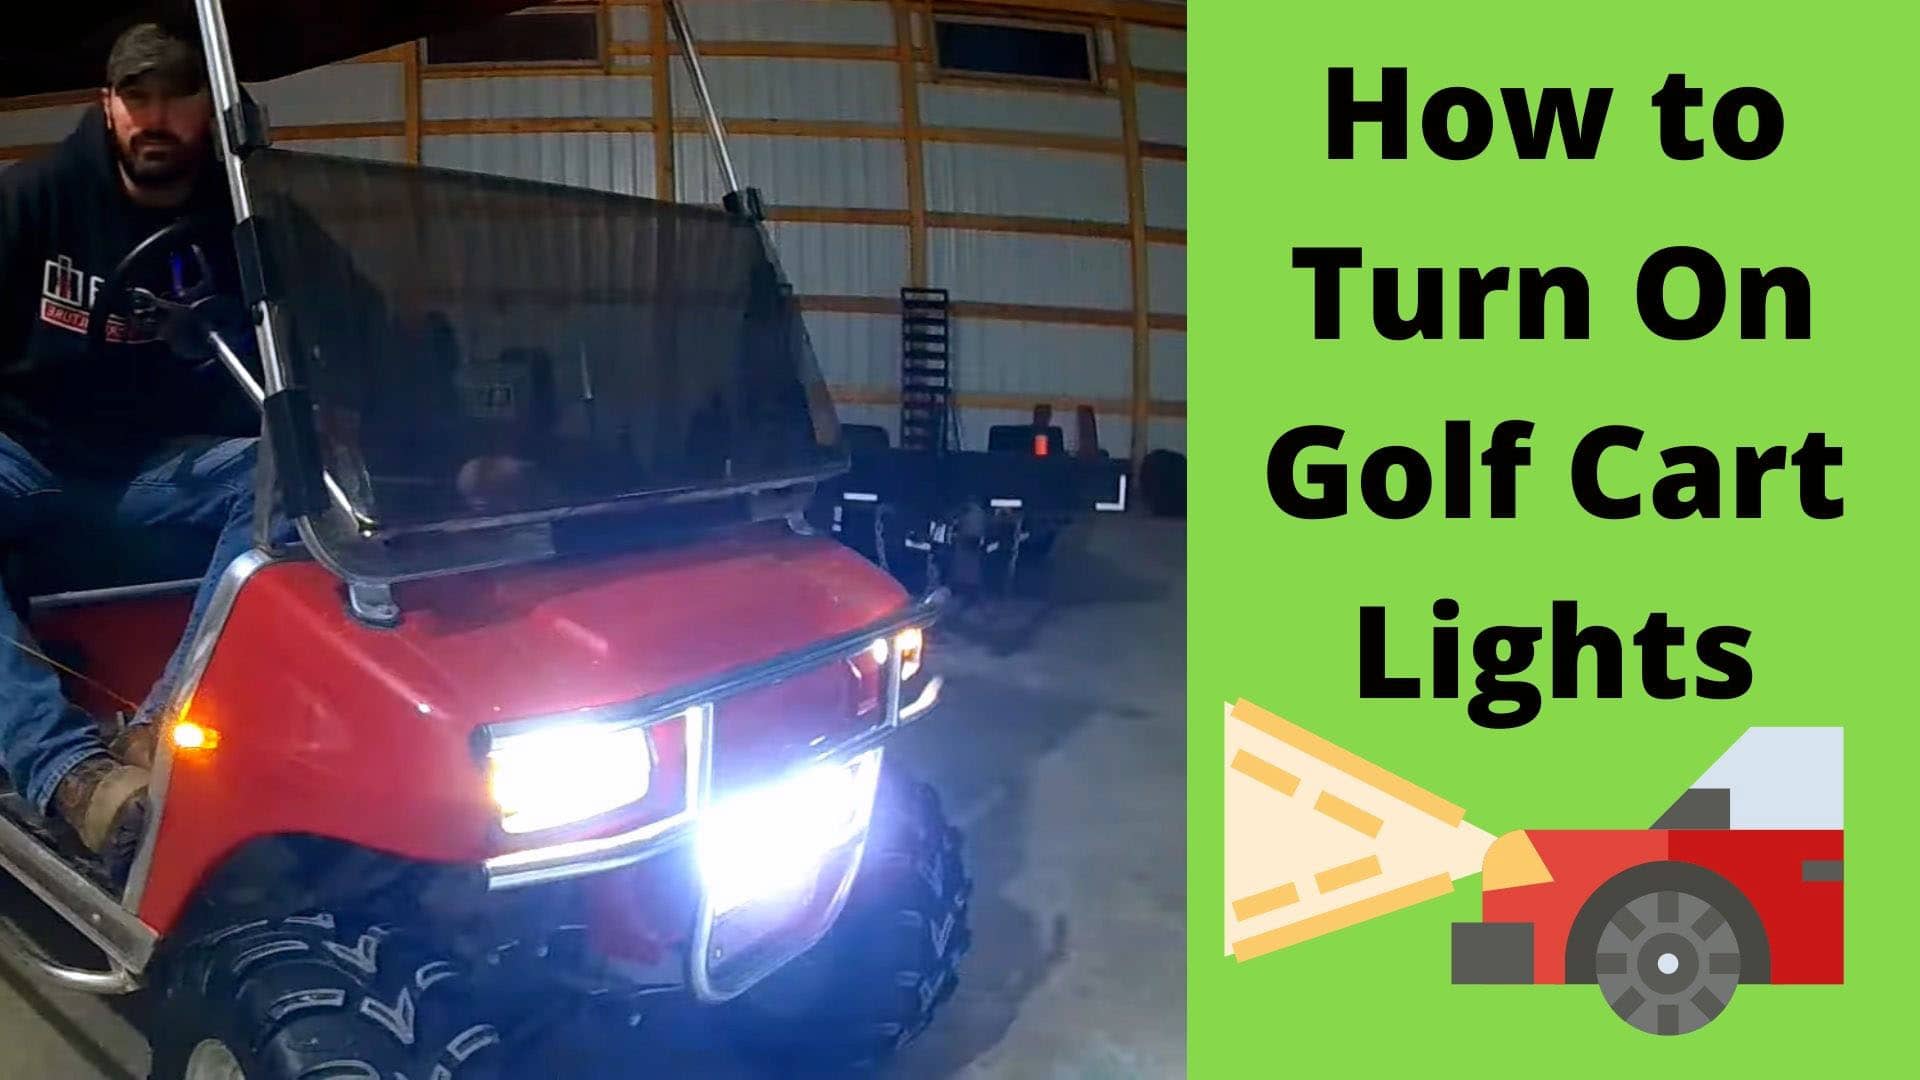 How to Turn On Golf Cart Lights